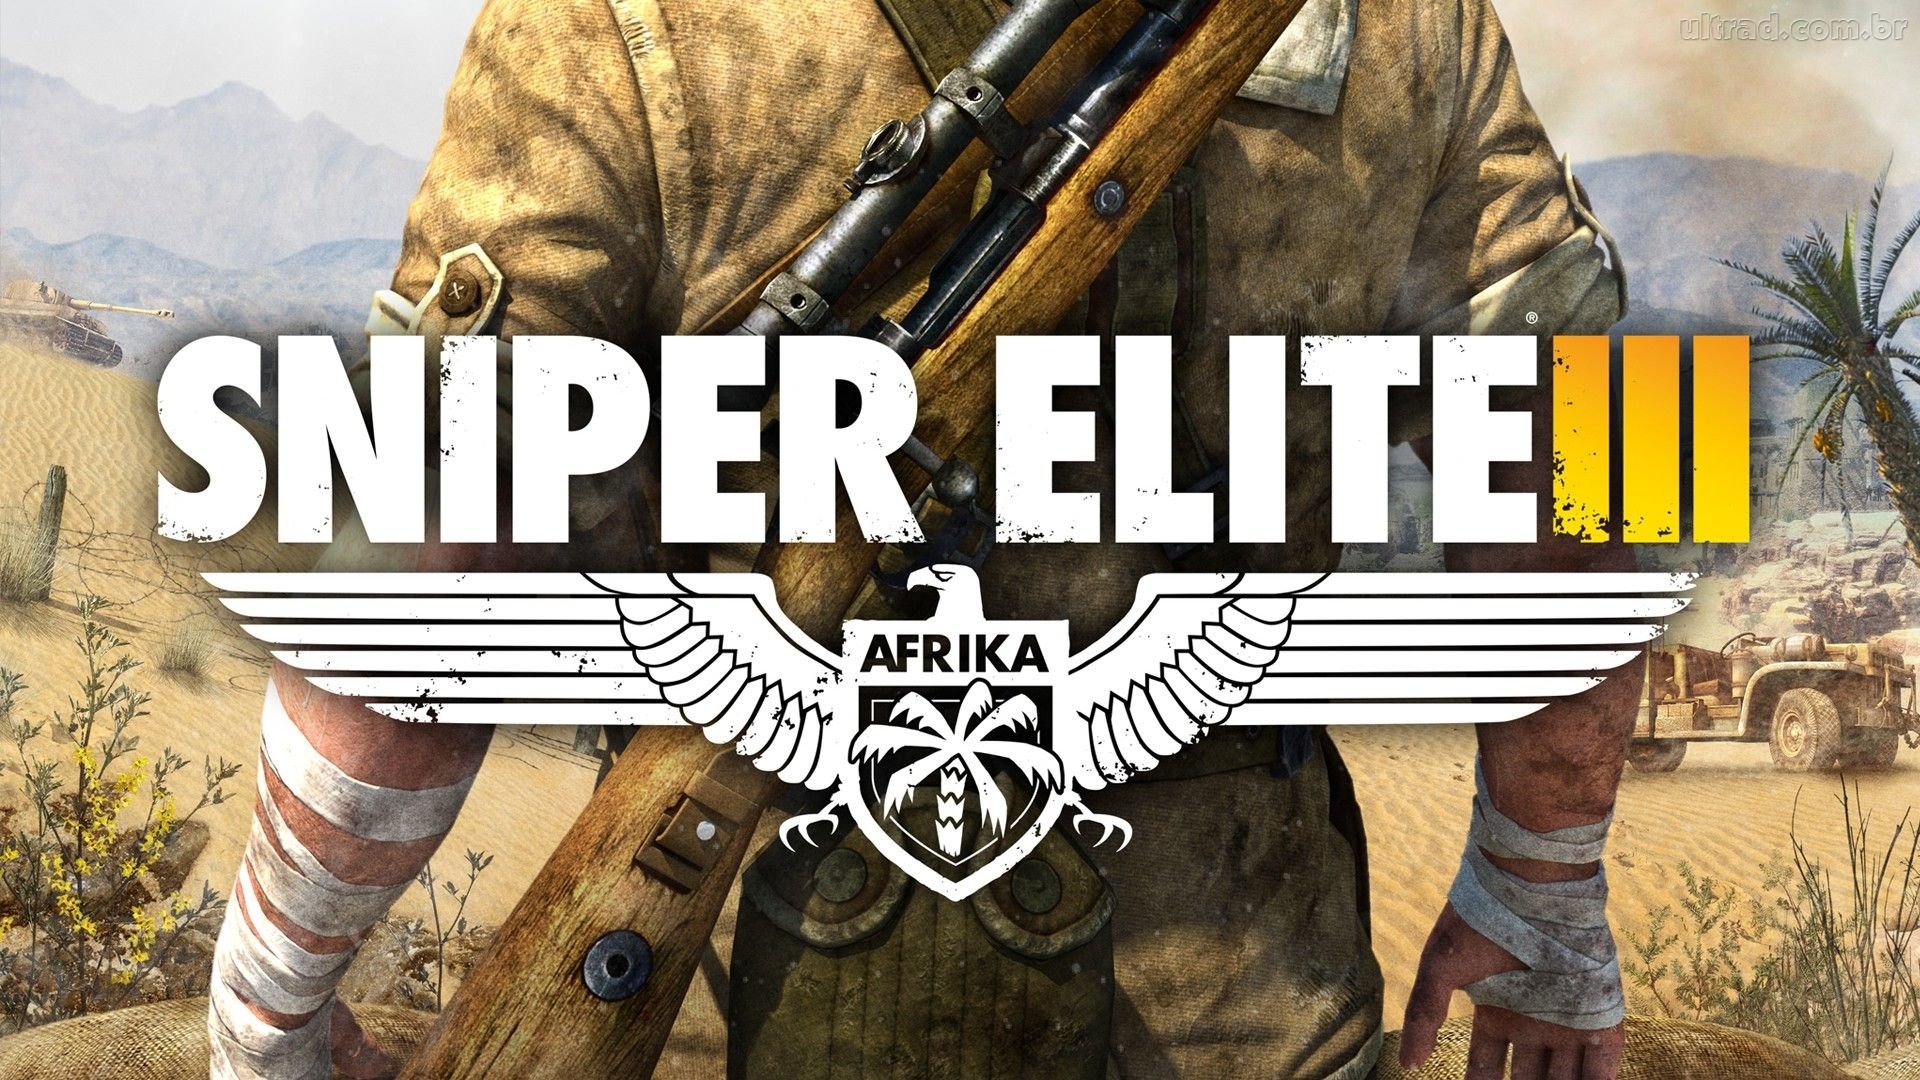 8 Sniper Elite 3 HD Wallpapers Background Images